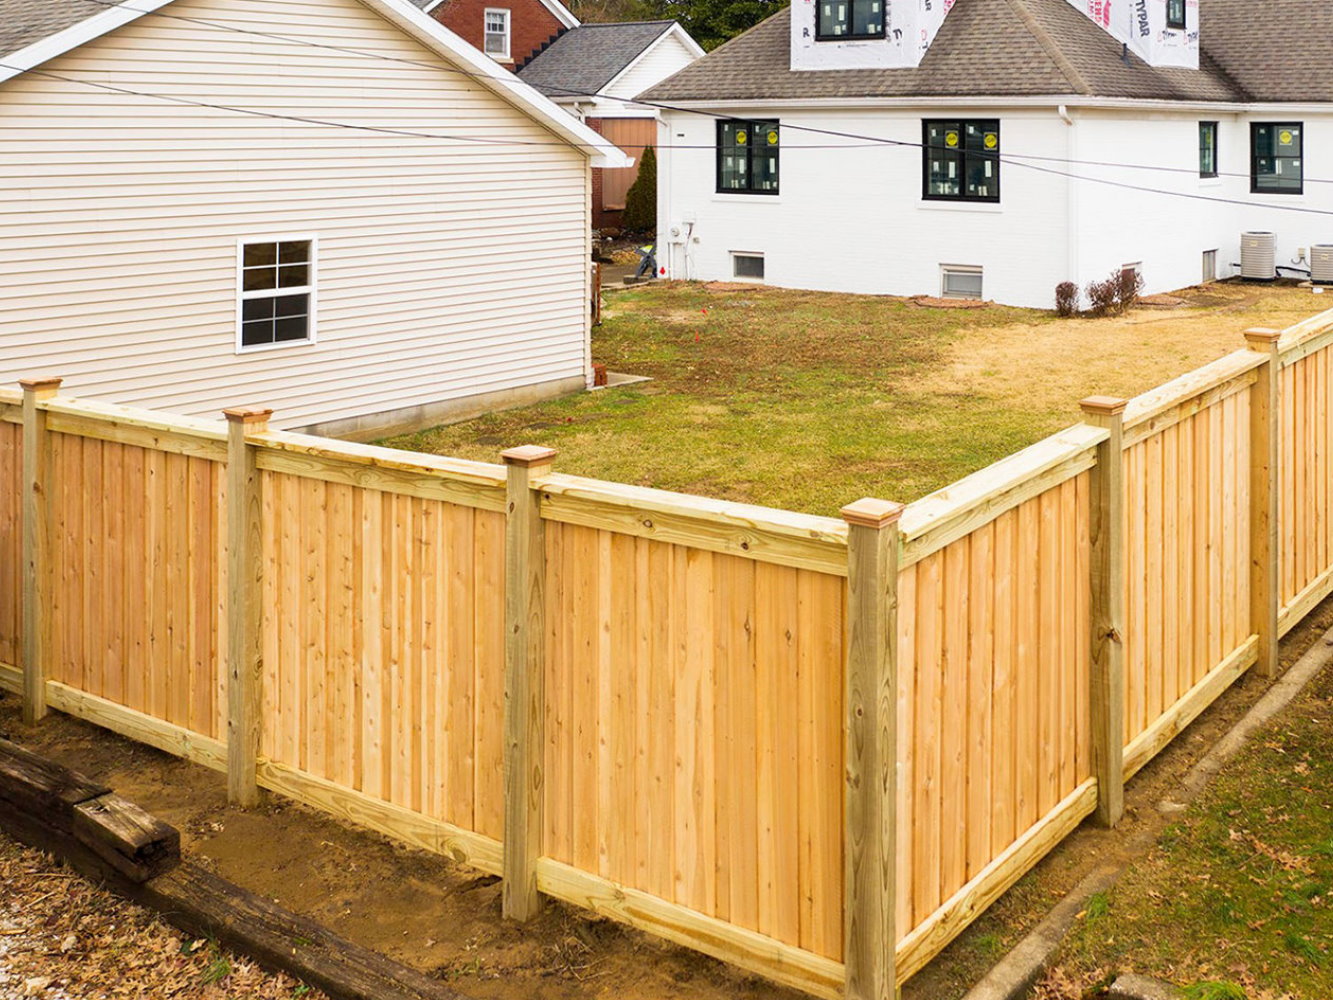 Baskett KY cap and trim style wood fence